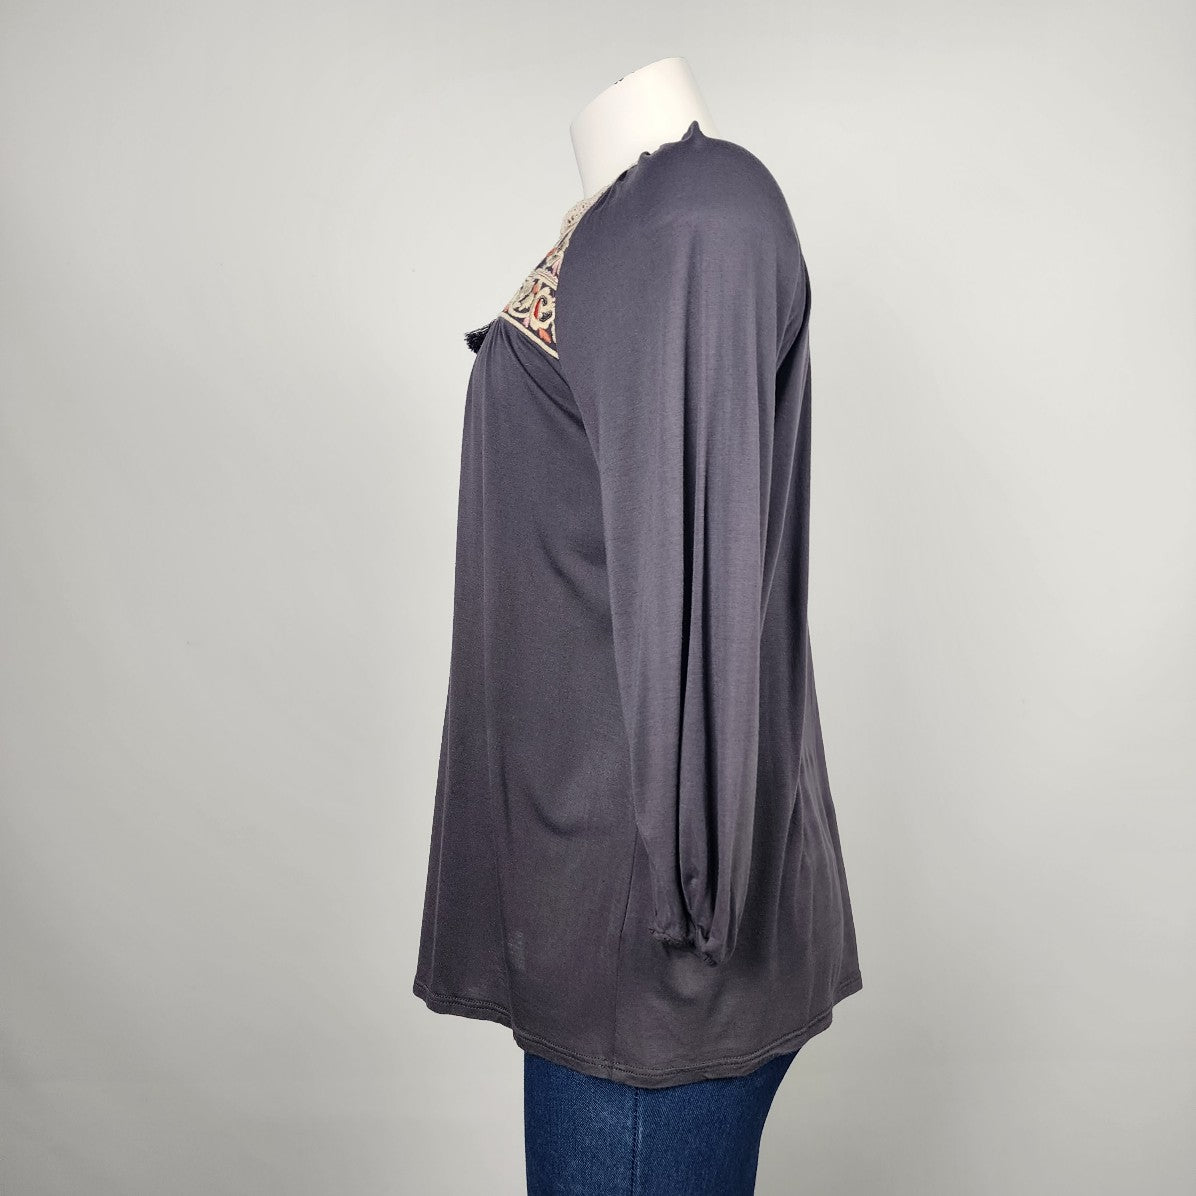 Anthropologie One September Grey Long Sleeve Peasant Top Size XS/S